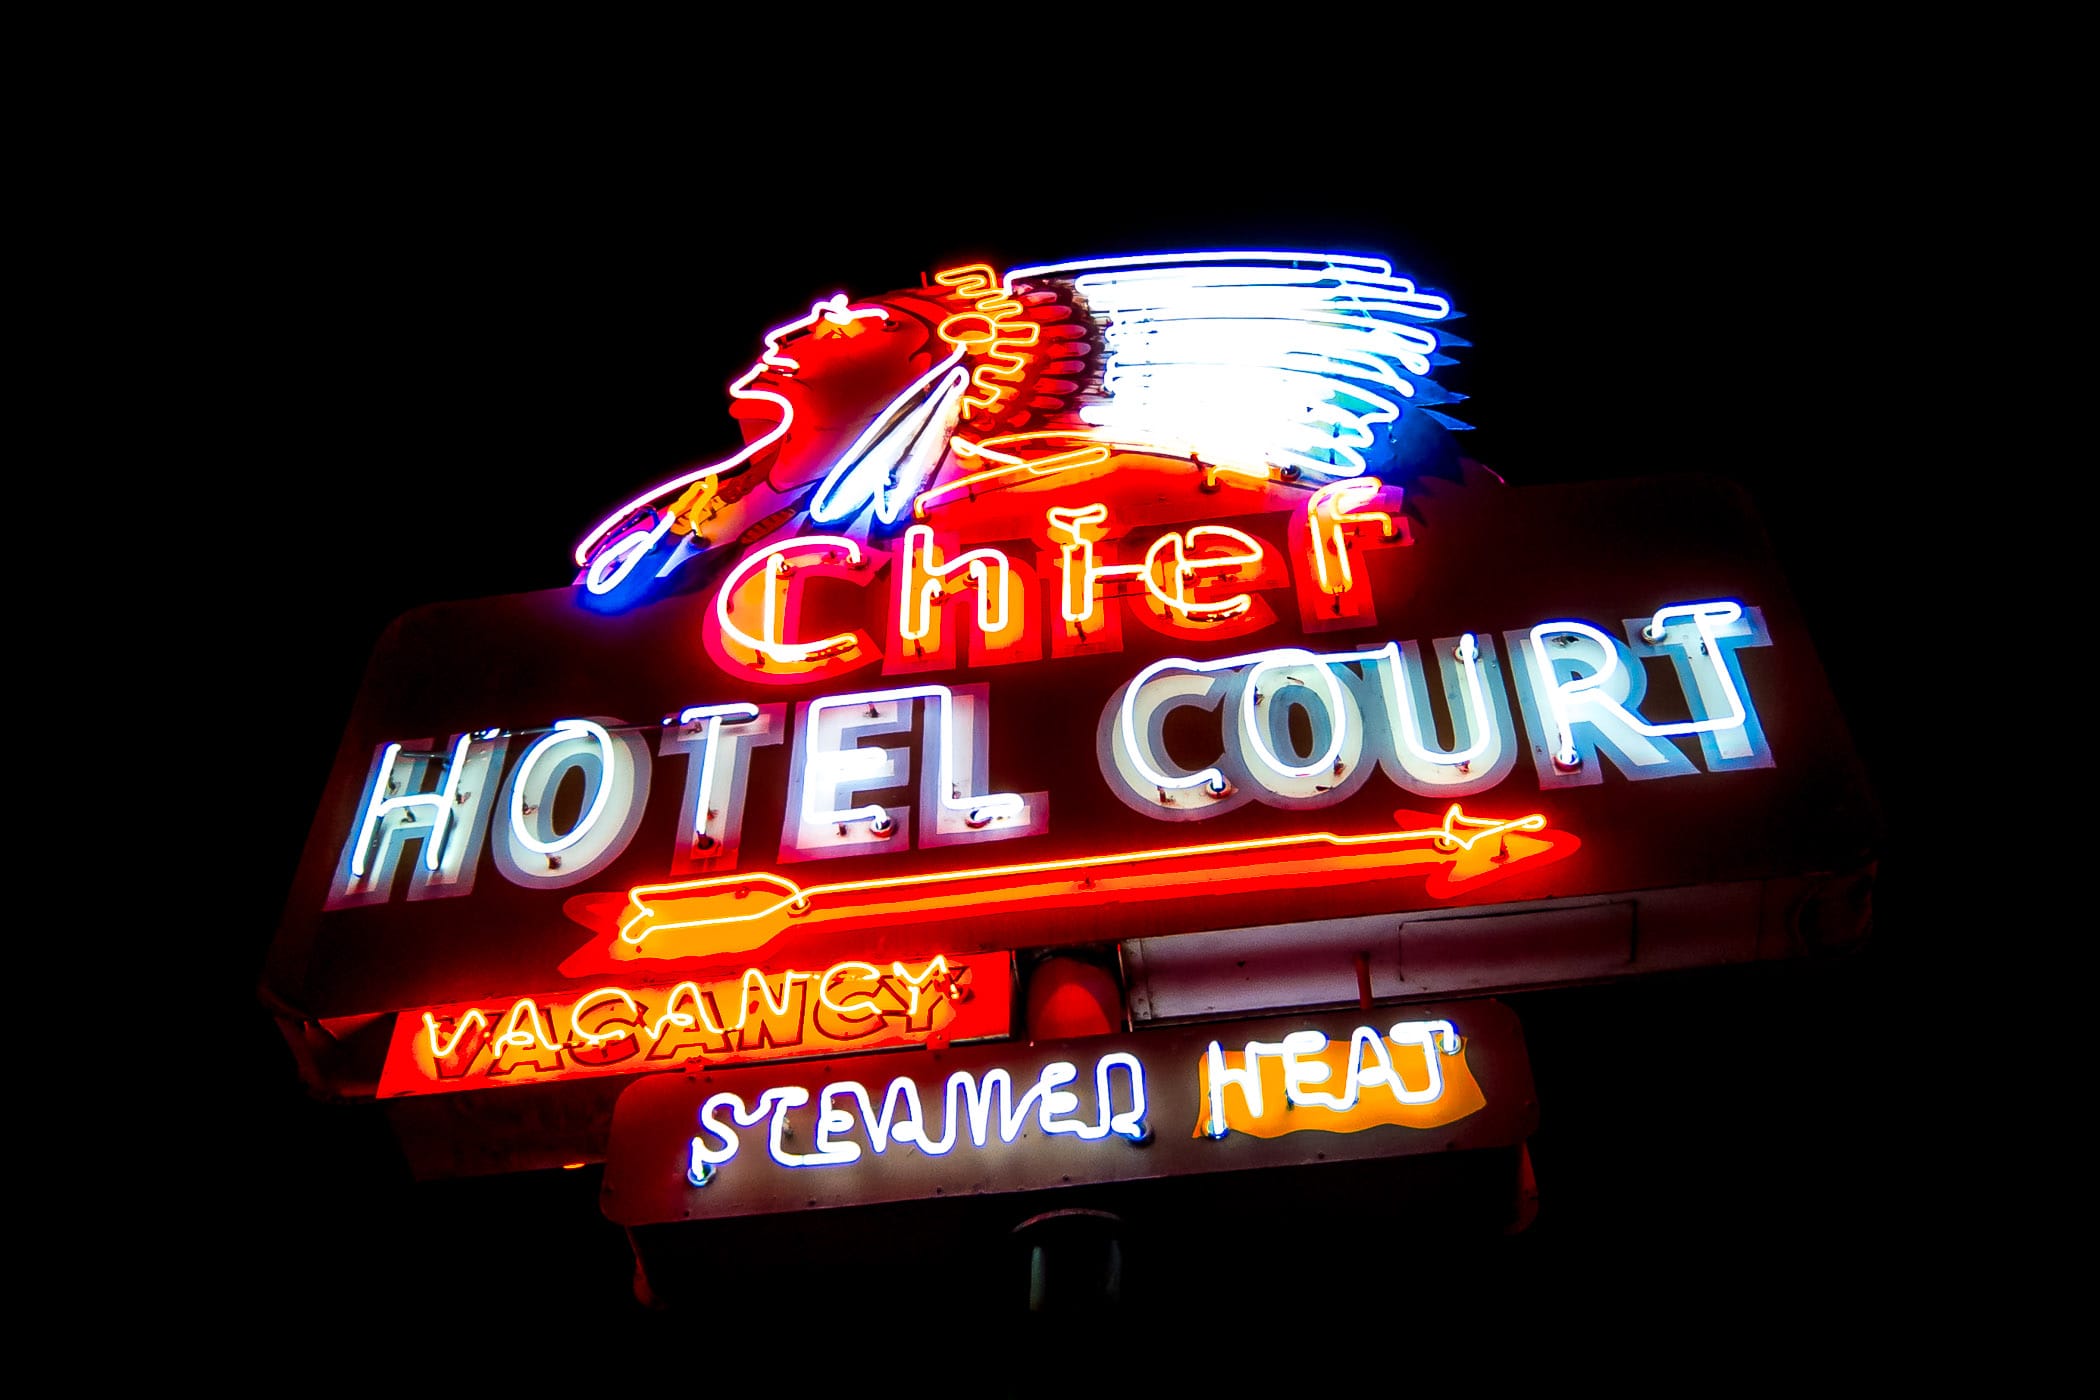 This striking neon sign for Las Vegas' long-gone Chief Hotel Court was erected in 1940. Since 1997, it's been a part of the collection of the Neon Museum and stands at the northeast corner of Fremont Street and 4th Street in Downtown Las Vegas.